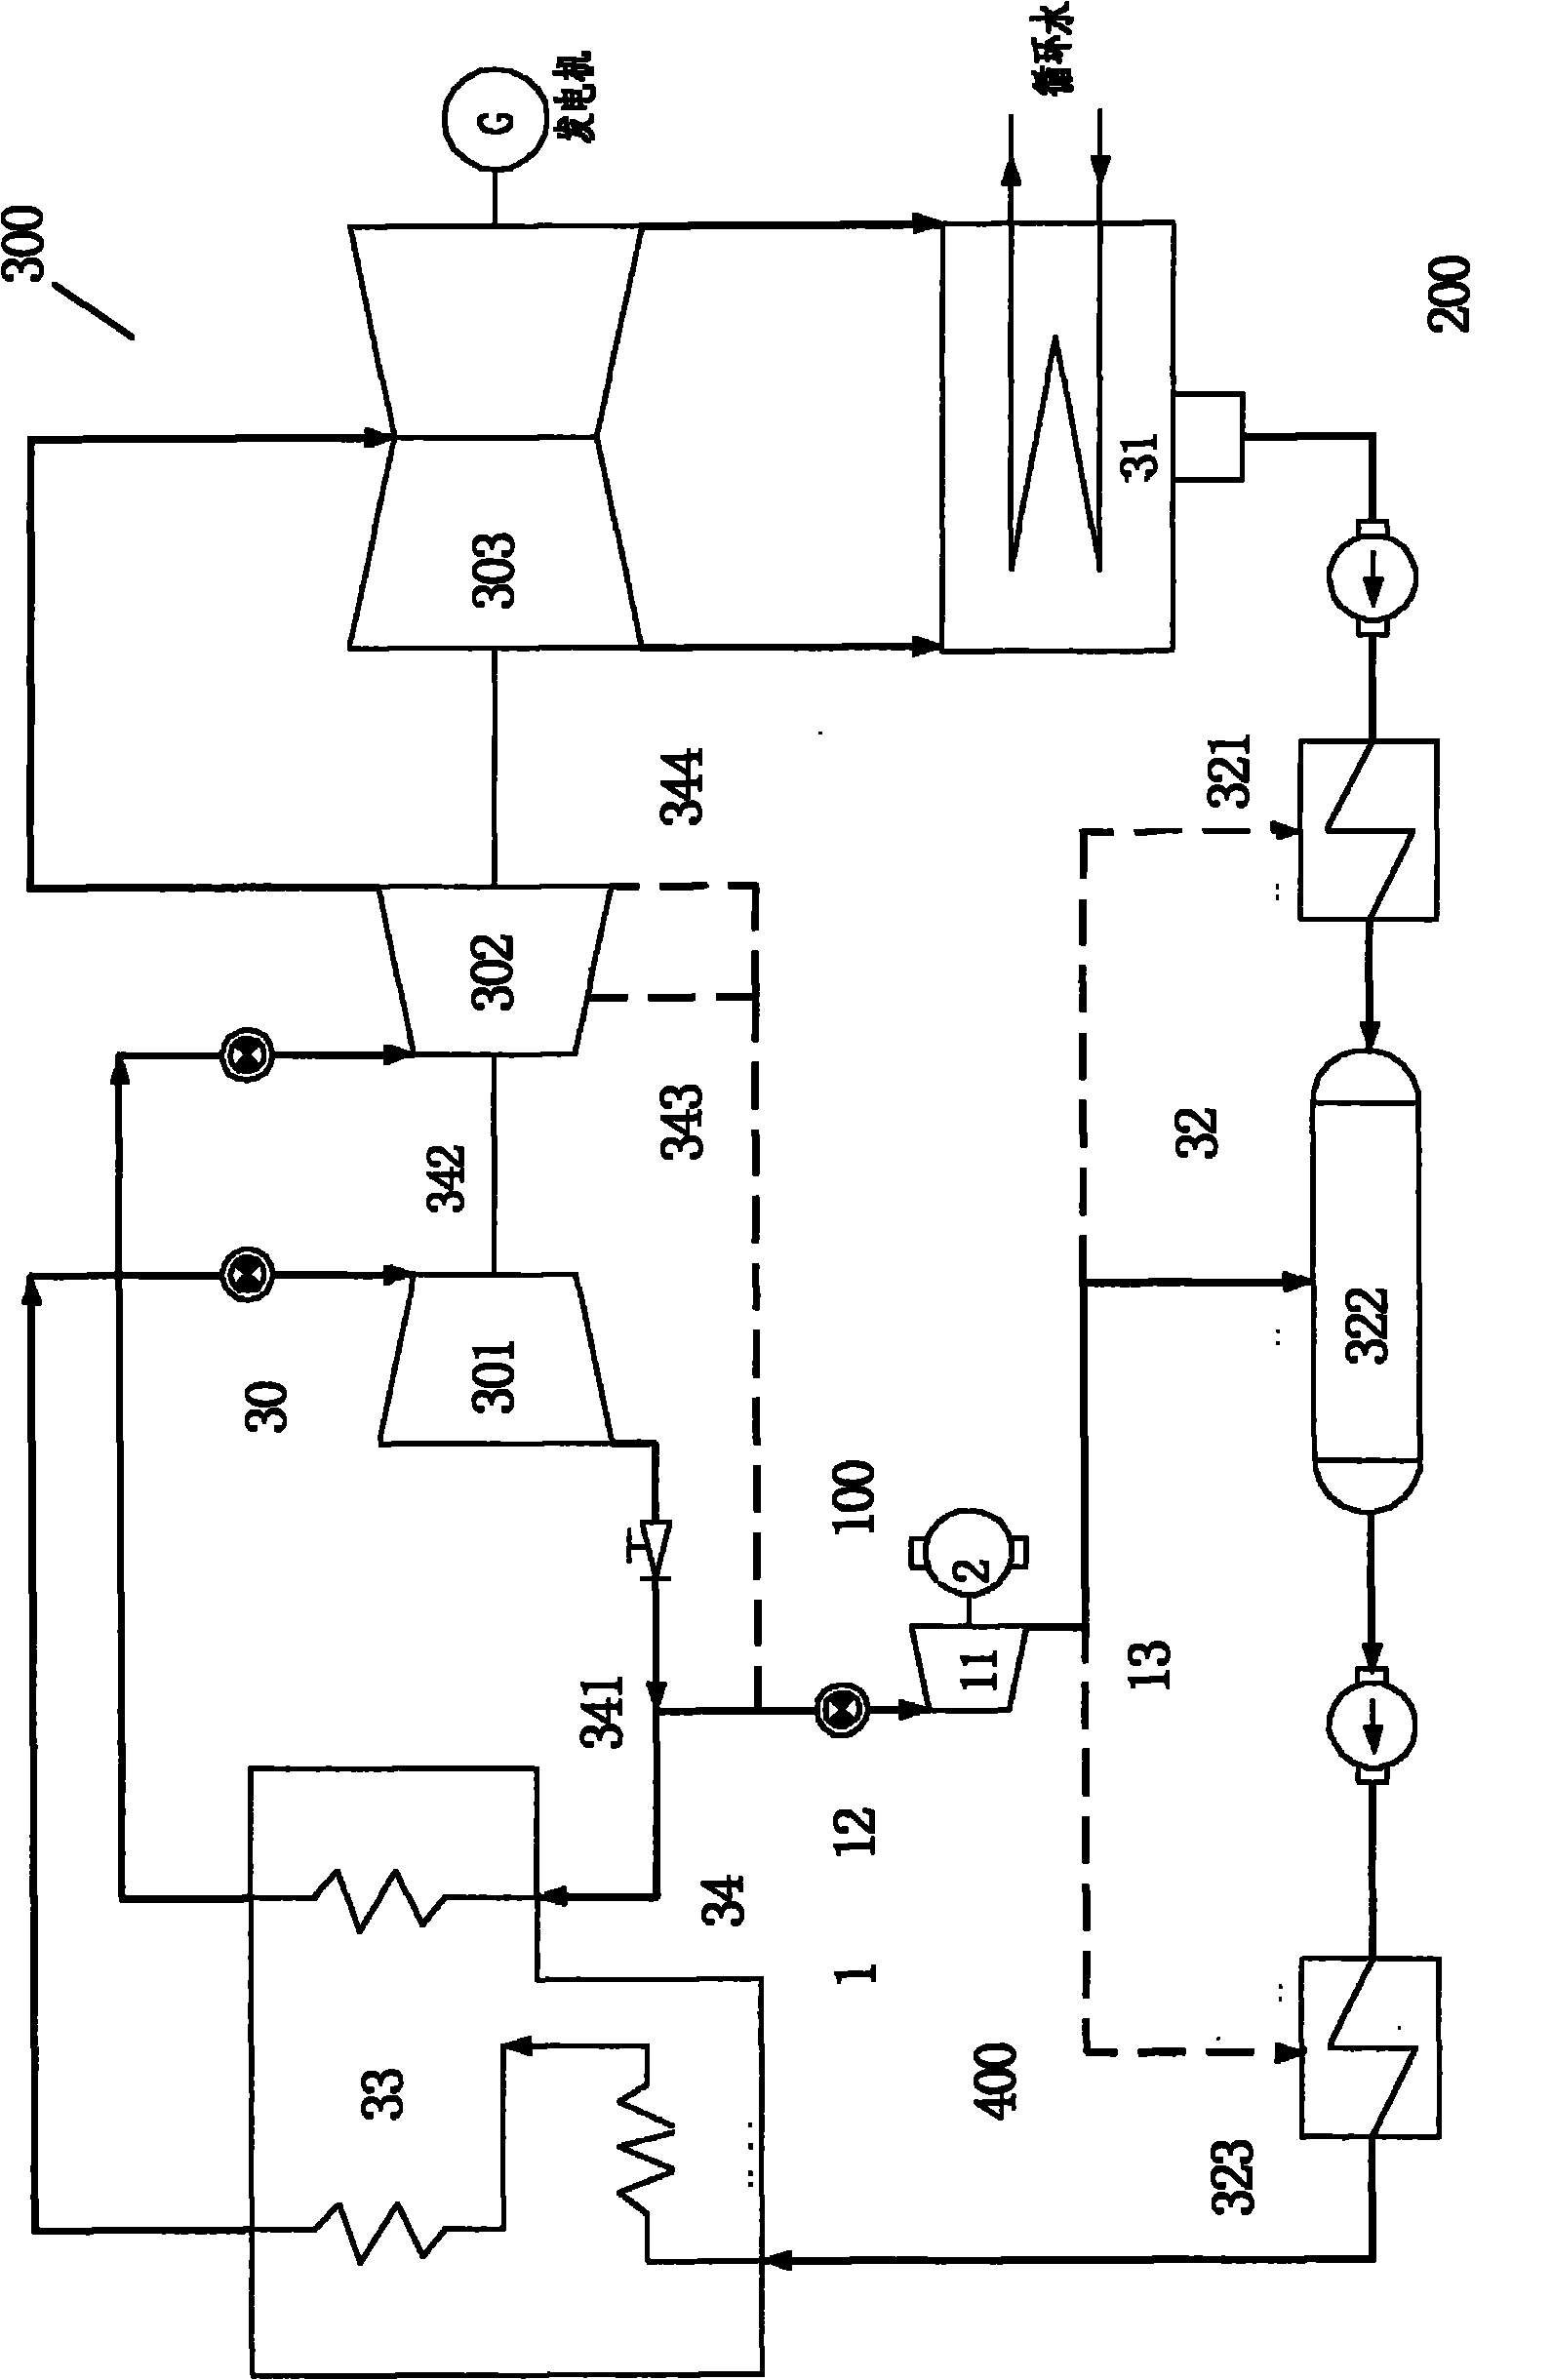 Small turbine system in power plant and thermal cycle system in power plant containing same